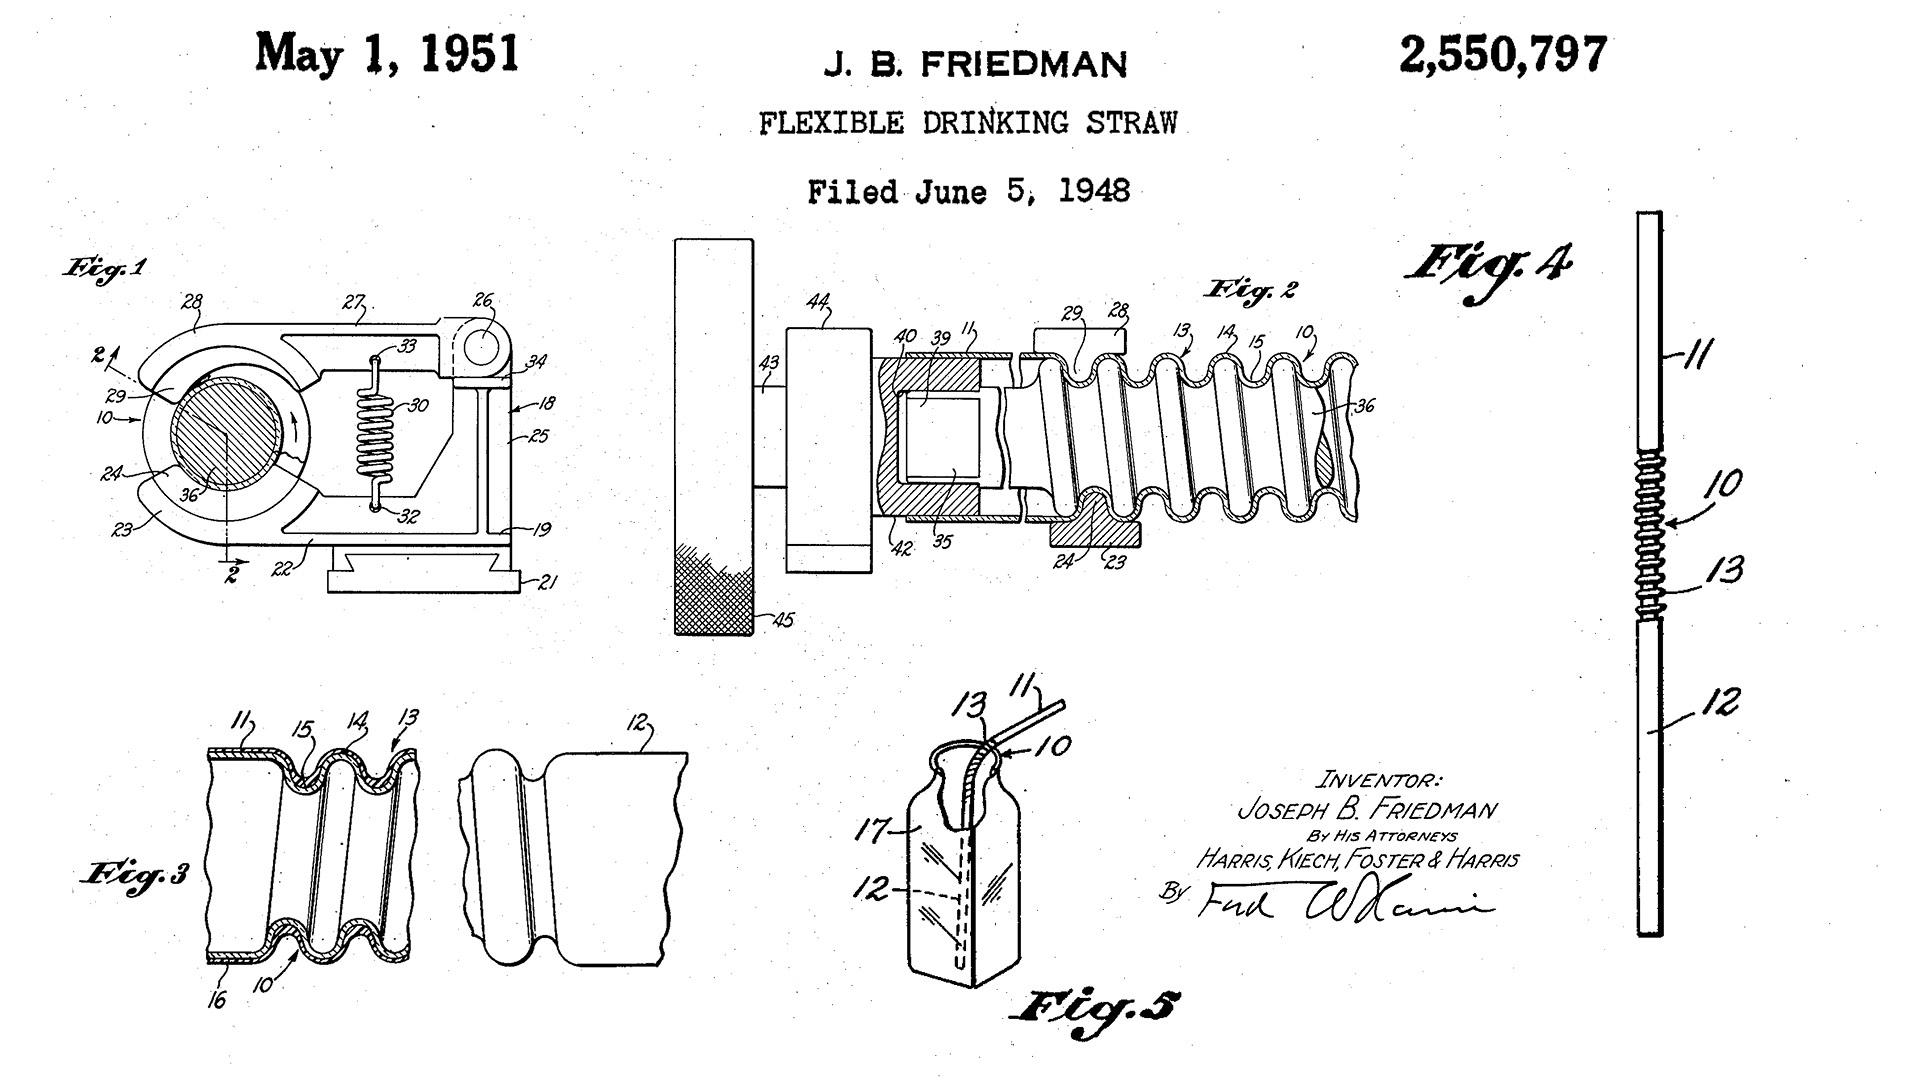 Patent document for bendy straw - (patented in 1951)